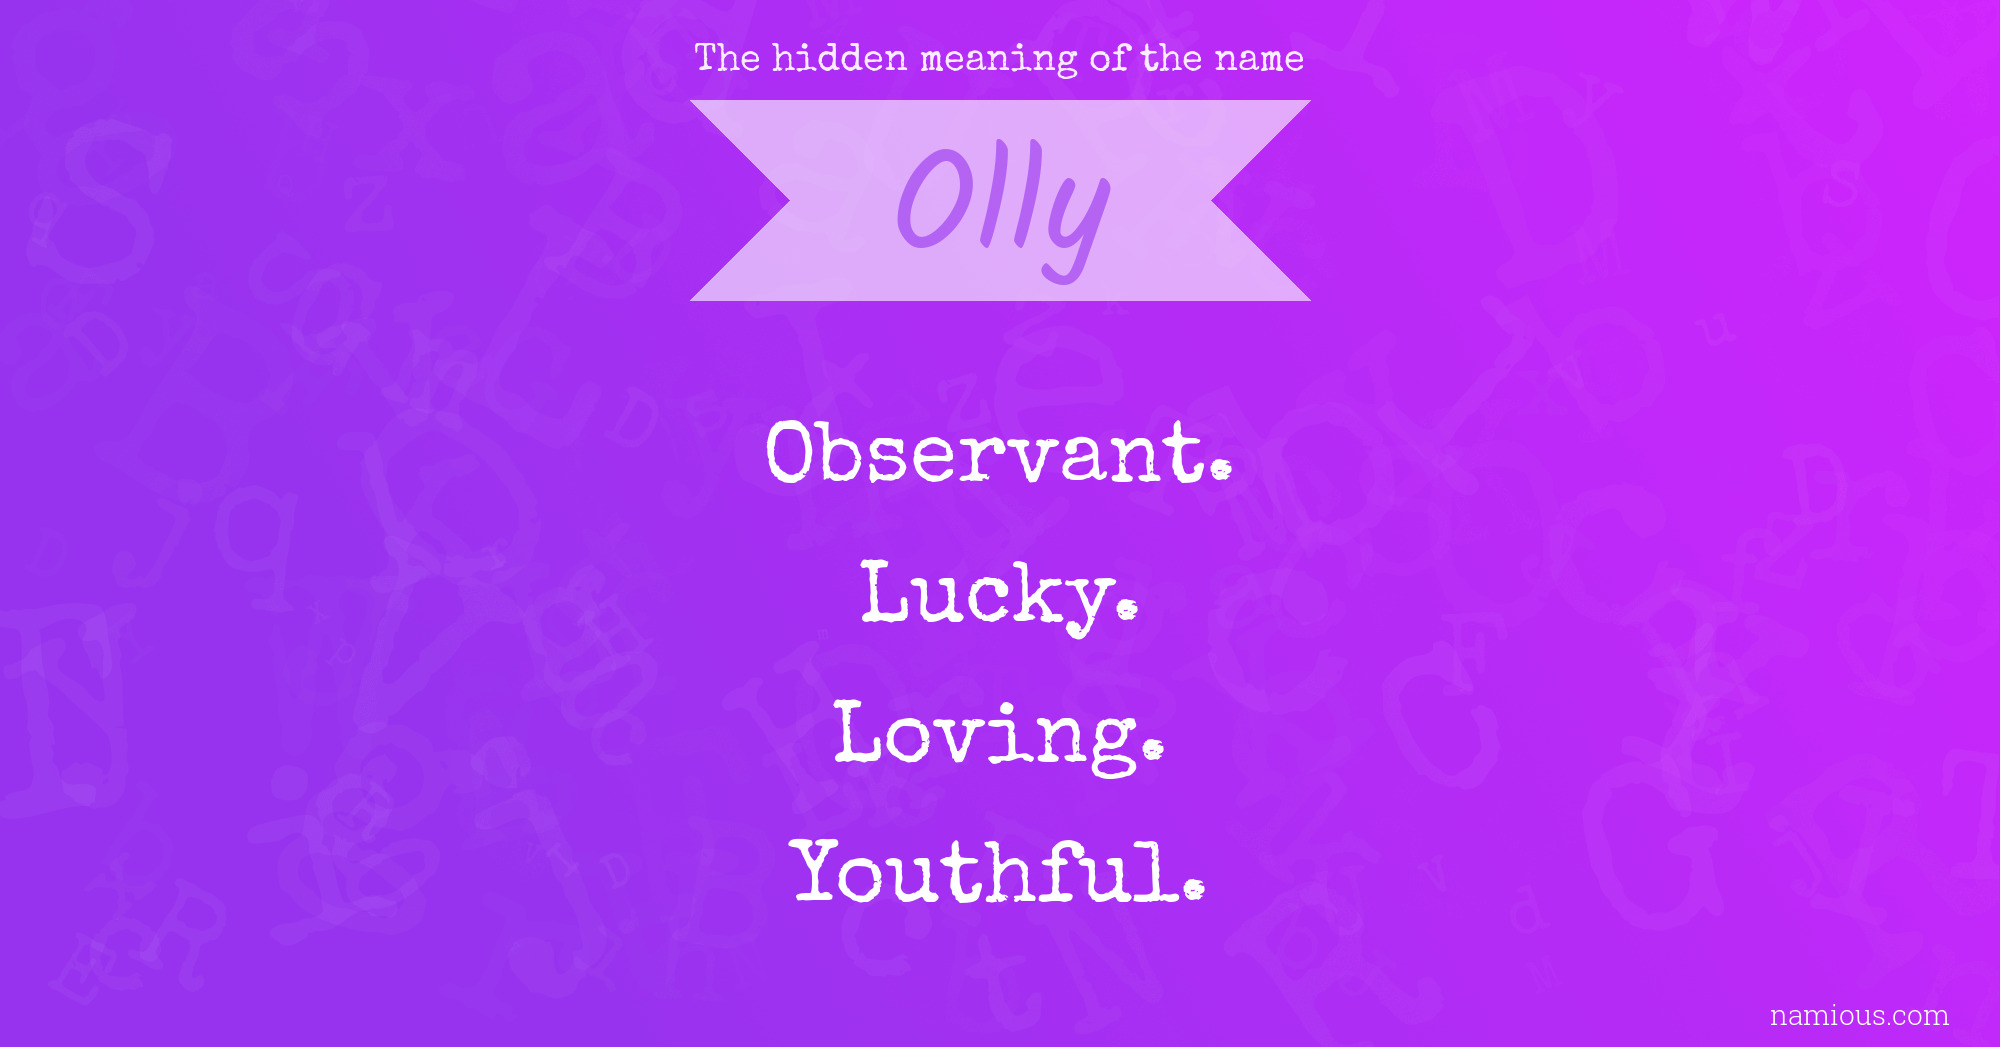 The hidden meaning of the name Olly